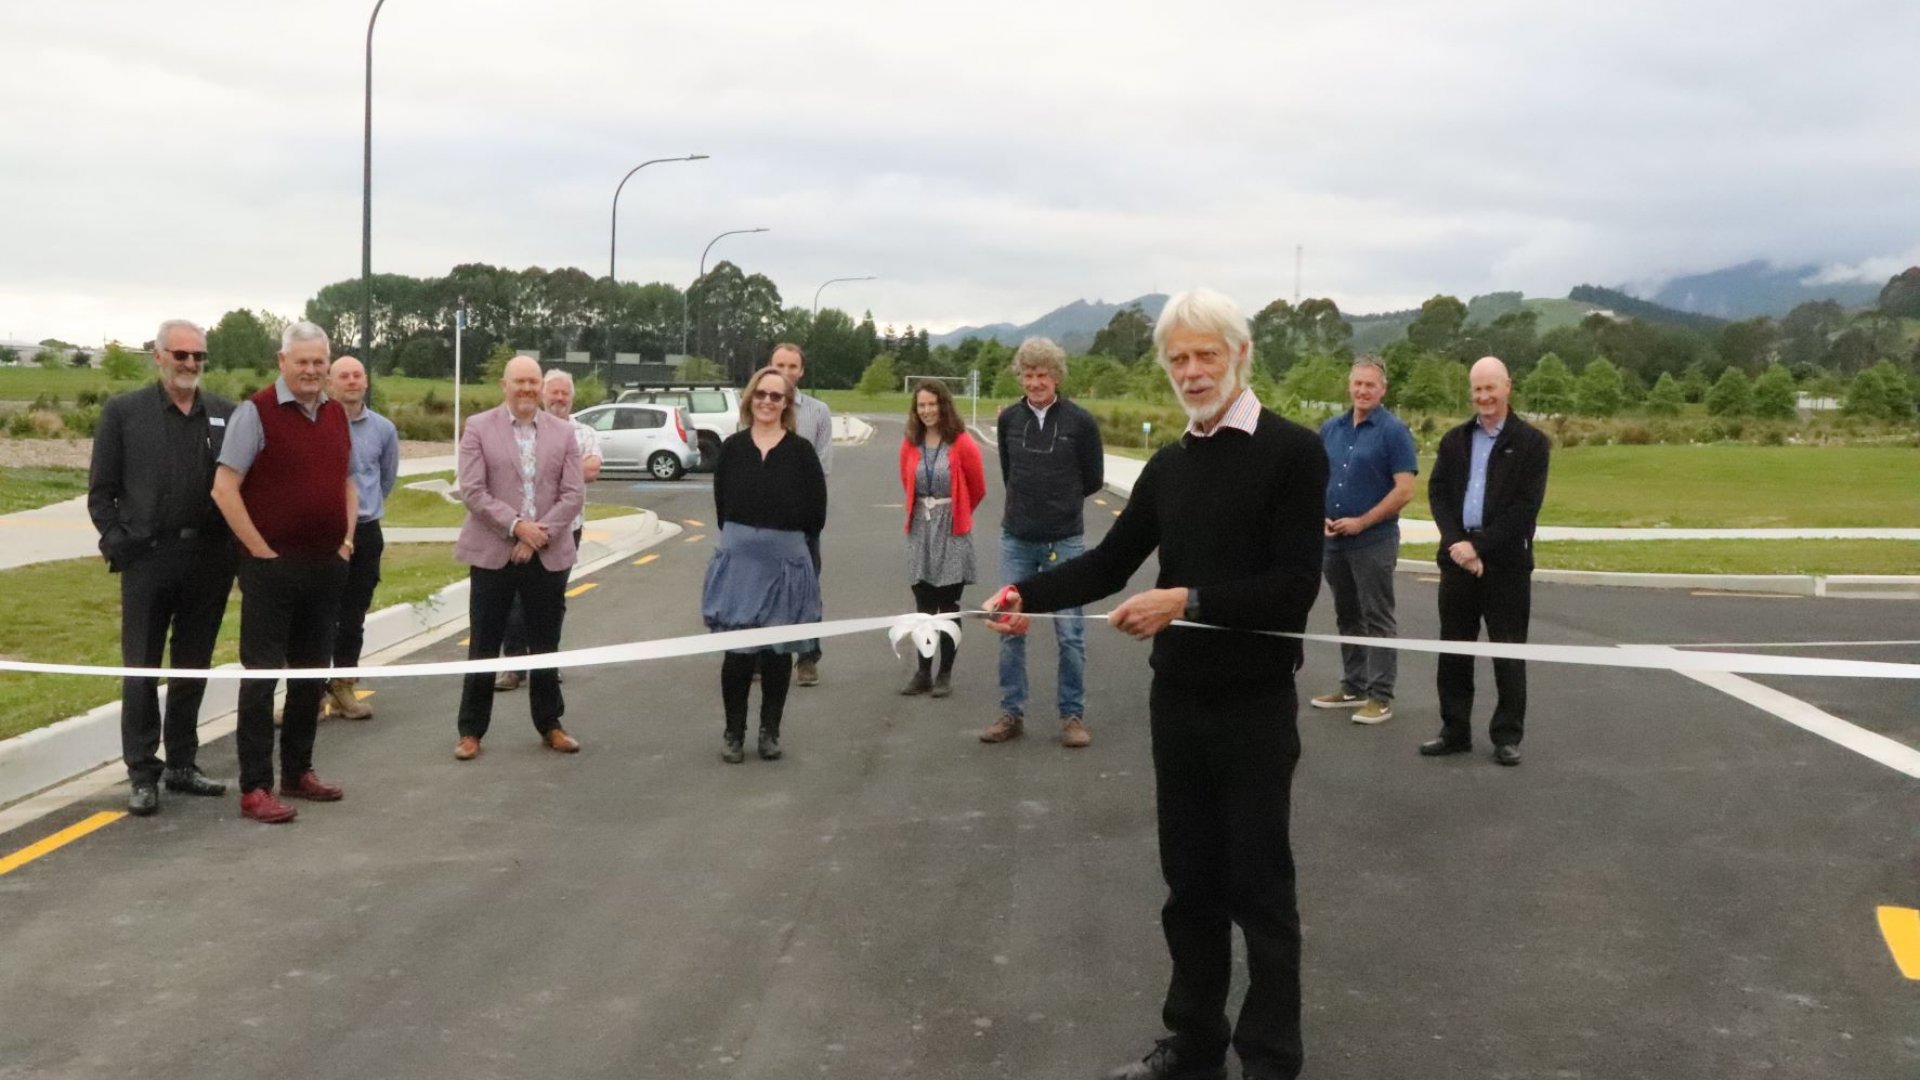 Derek Shaw, Independent Chair of the Saxton Field Committee cuts the ribbon to open the new link road and car park.